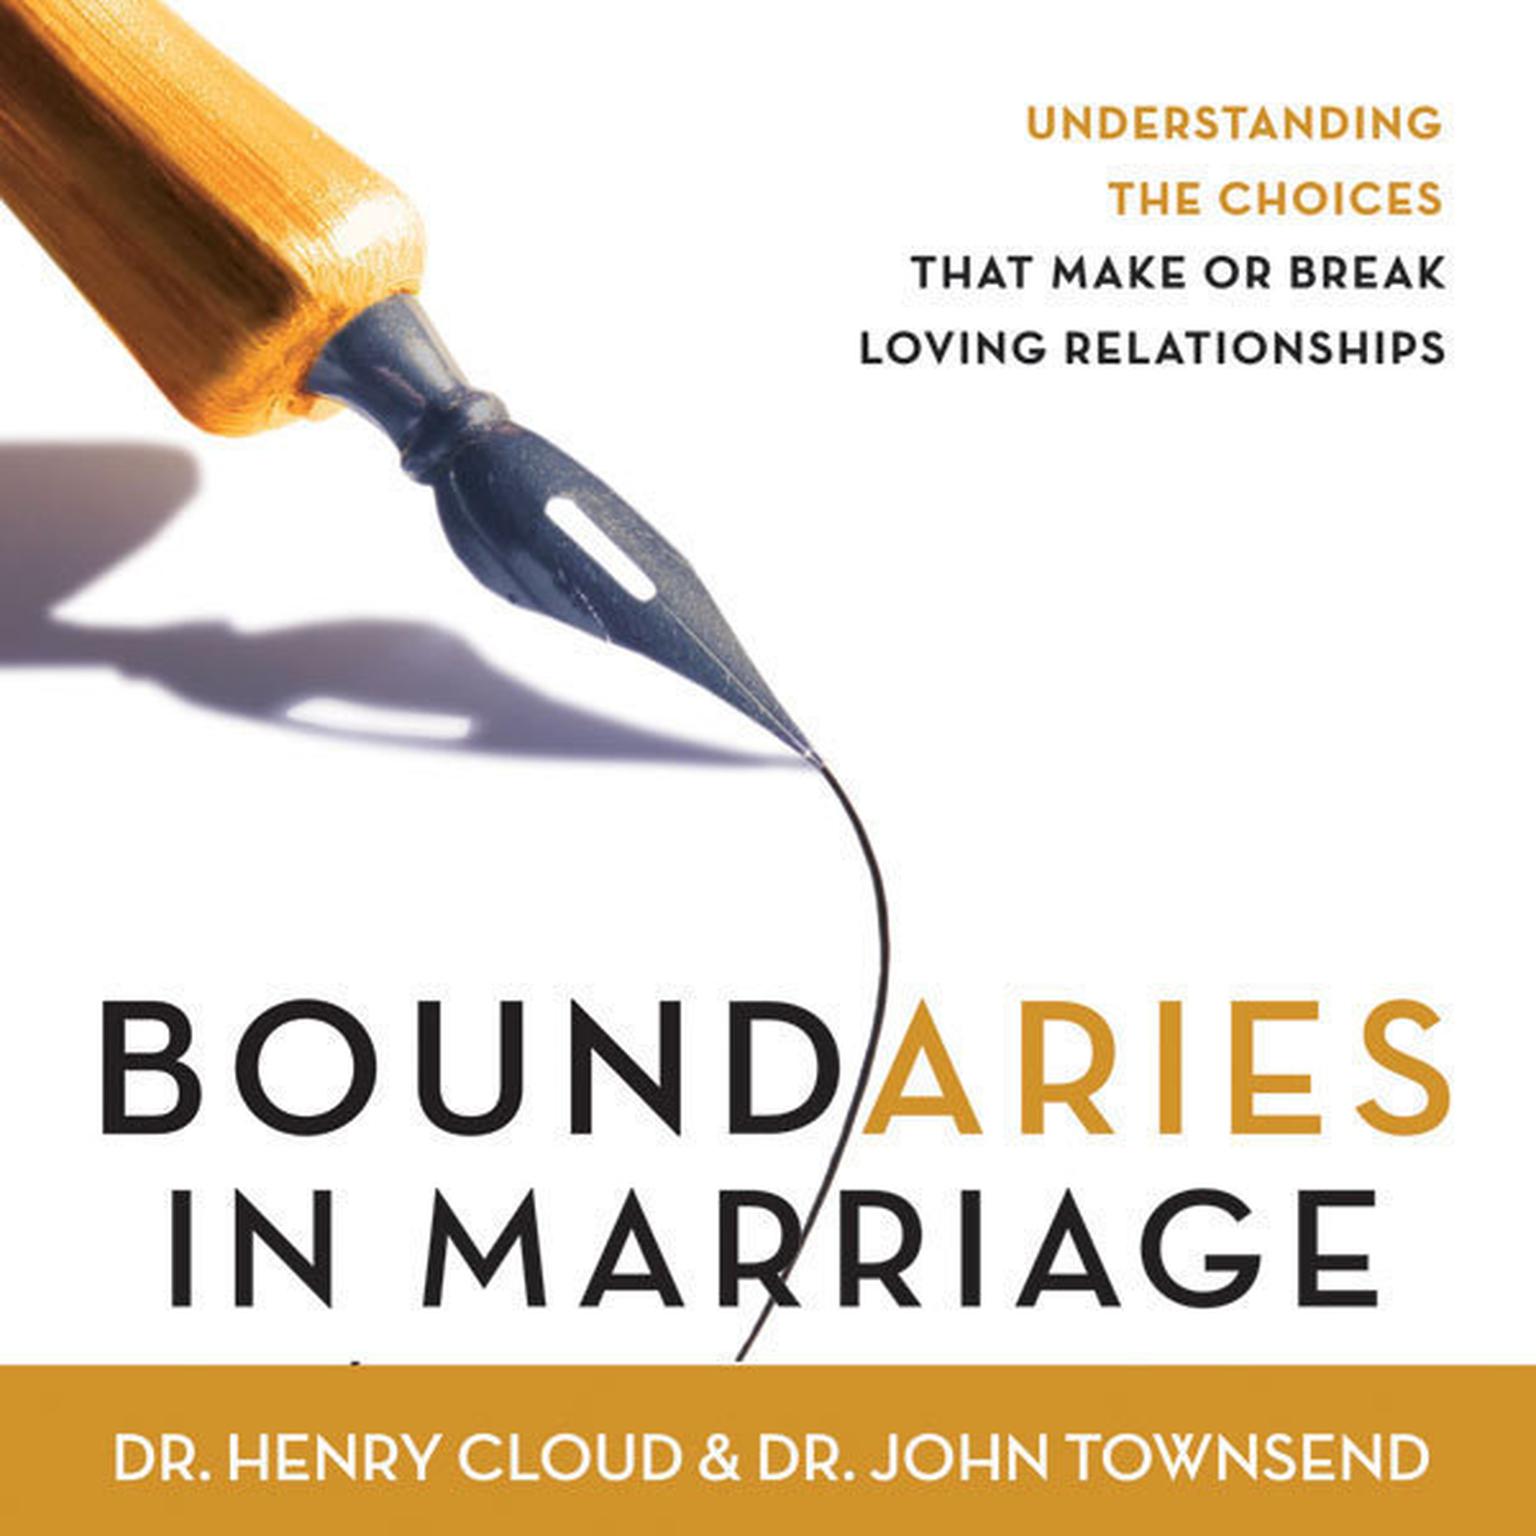 Boundaries in Marriage (Abridged): Understanding the Choices That Make or Break Loving Relationships Audiobook, by Henry Cloud